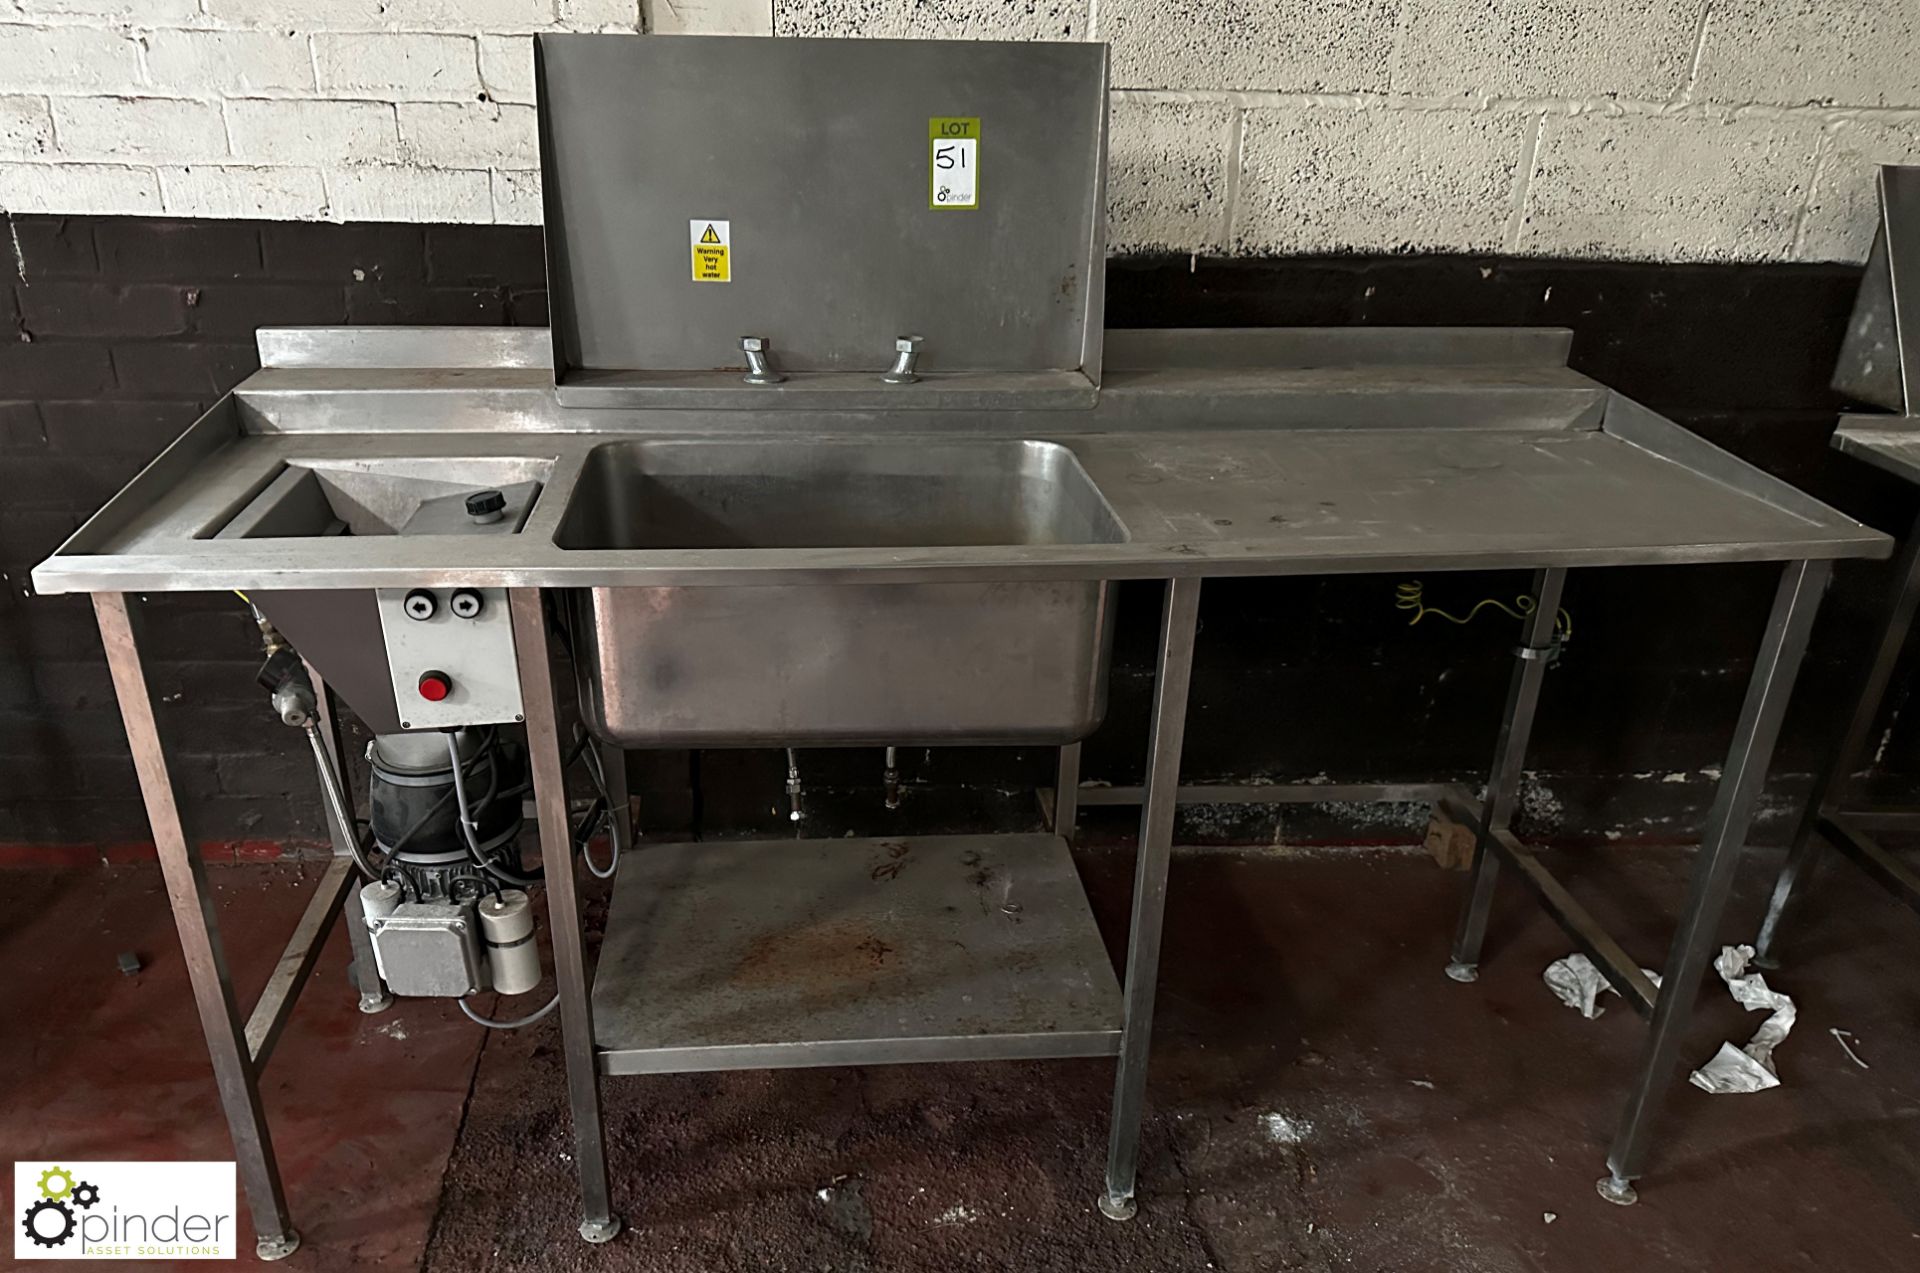 Stainless steel Wash Sink, 1800mm x 710mm x 810mm, with waste disposal unit